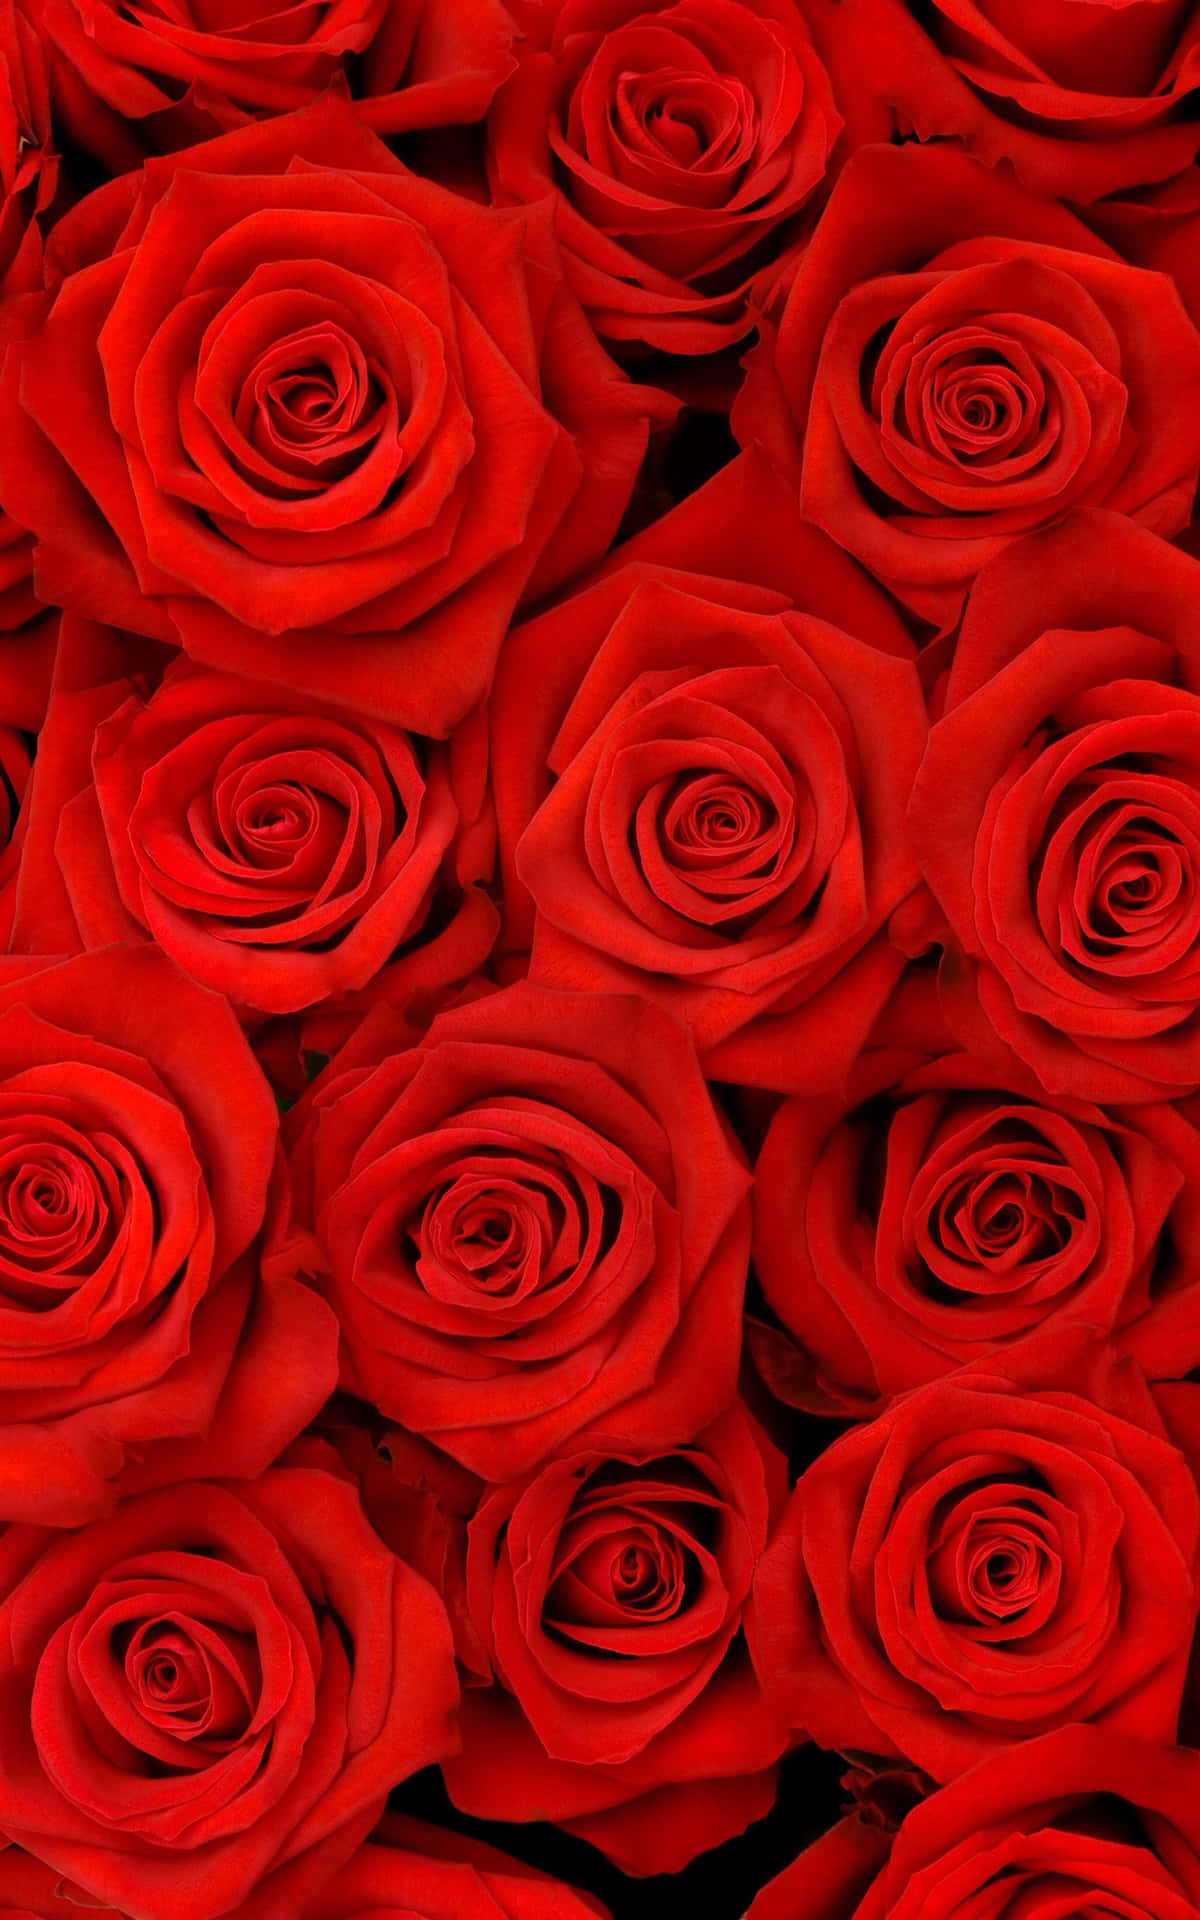 A Bunch Of Red Iphone X Roses Background